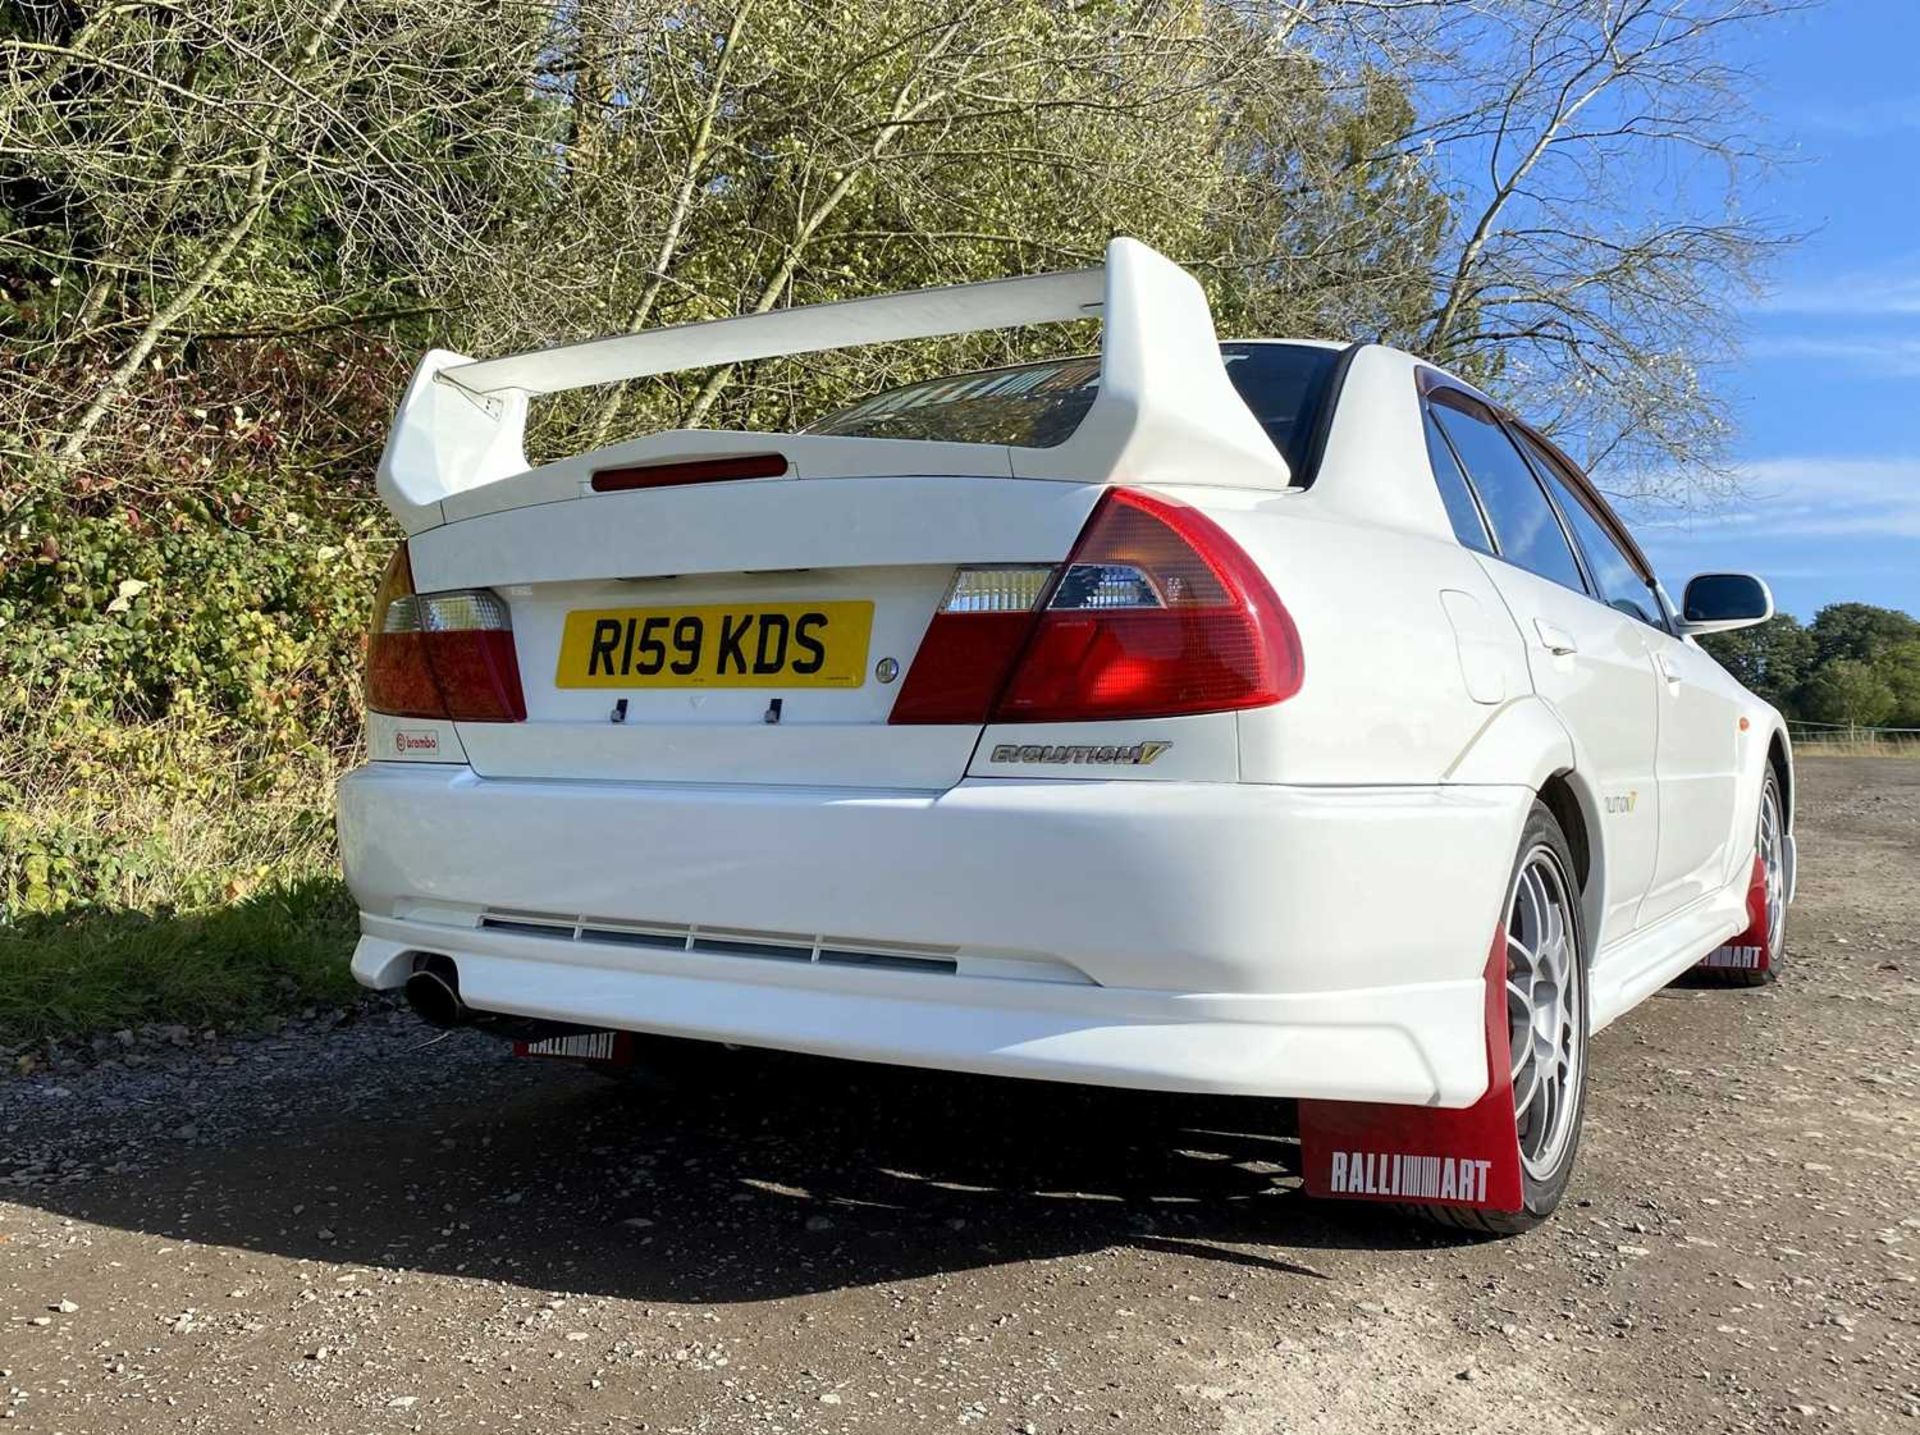 1998 Mitsubishi Lancer Evolution V GSR One UK keeper since being imported two years ago - Image 19 of 100